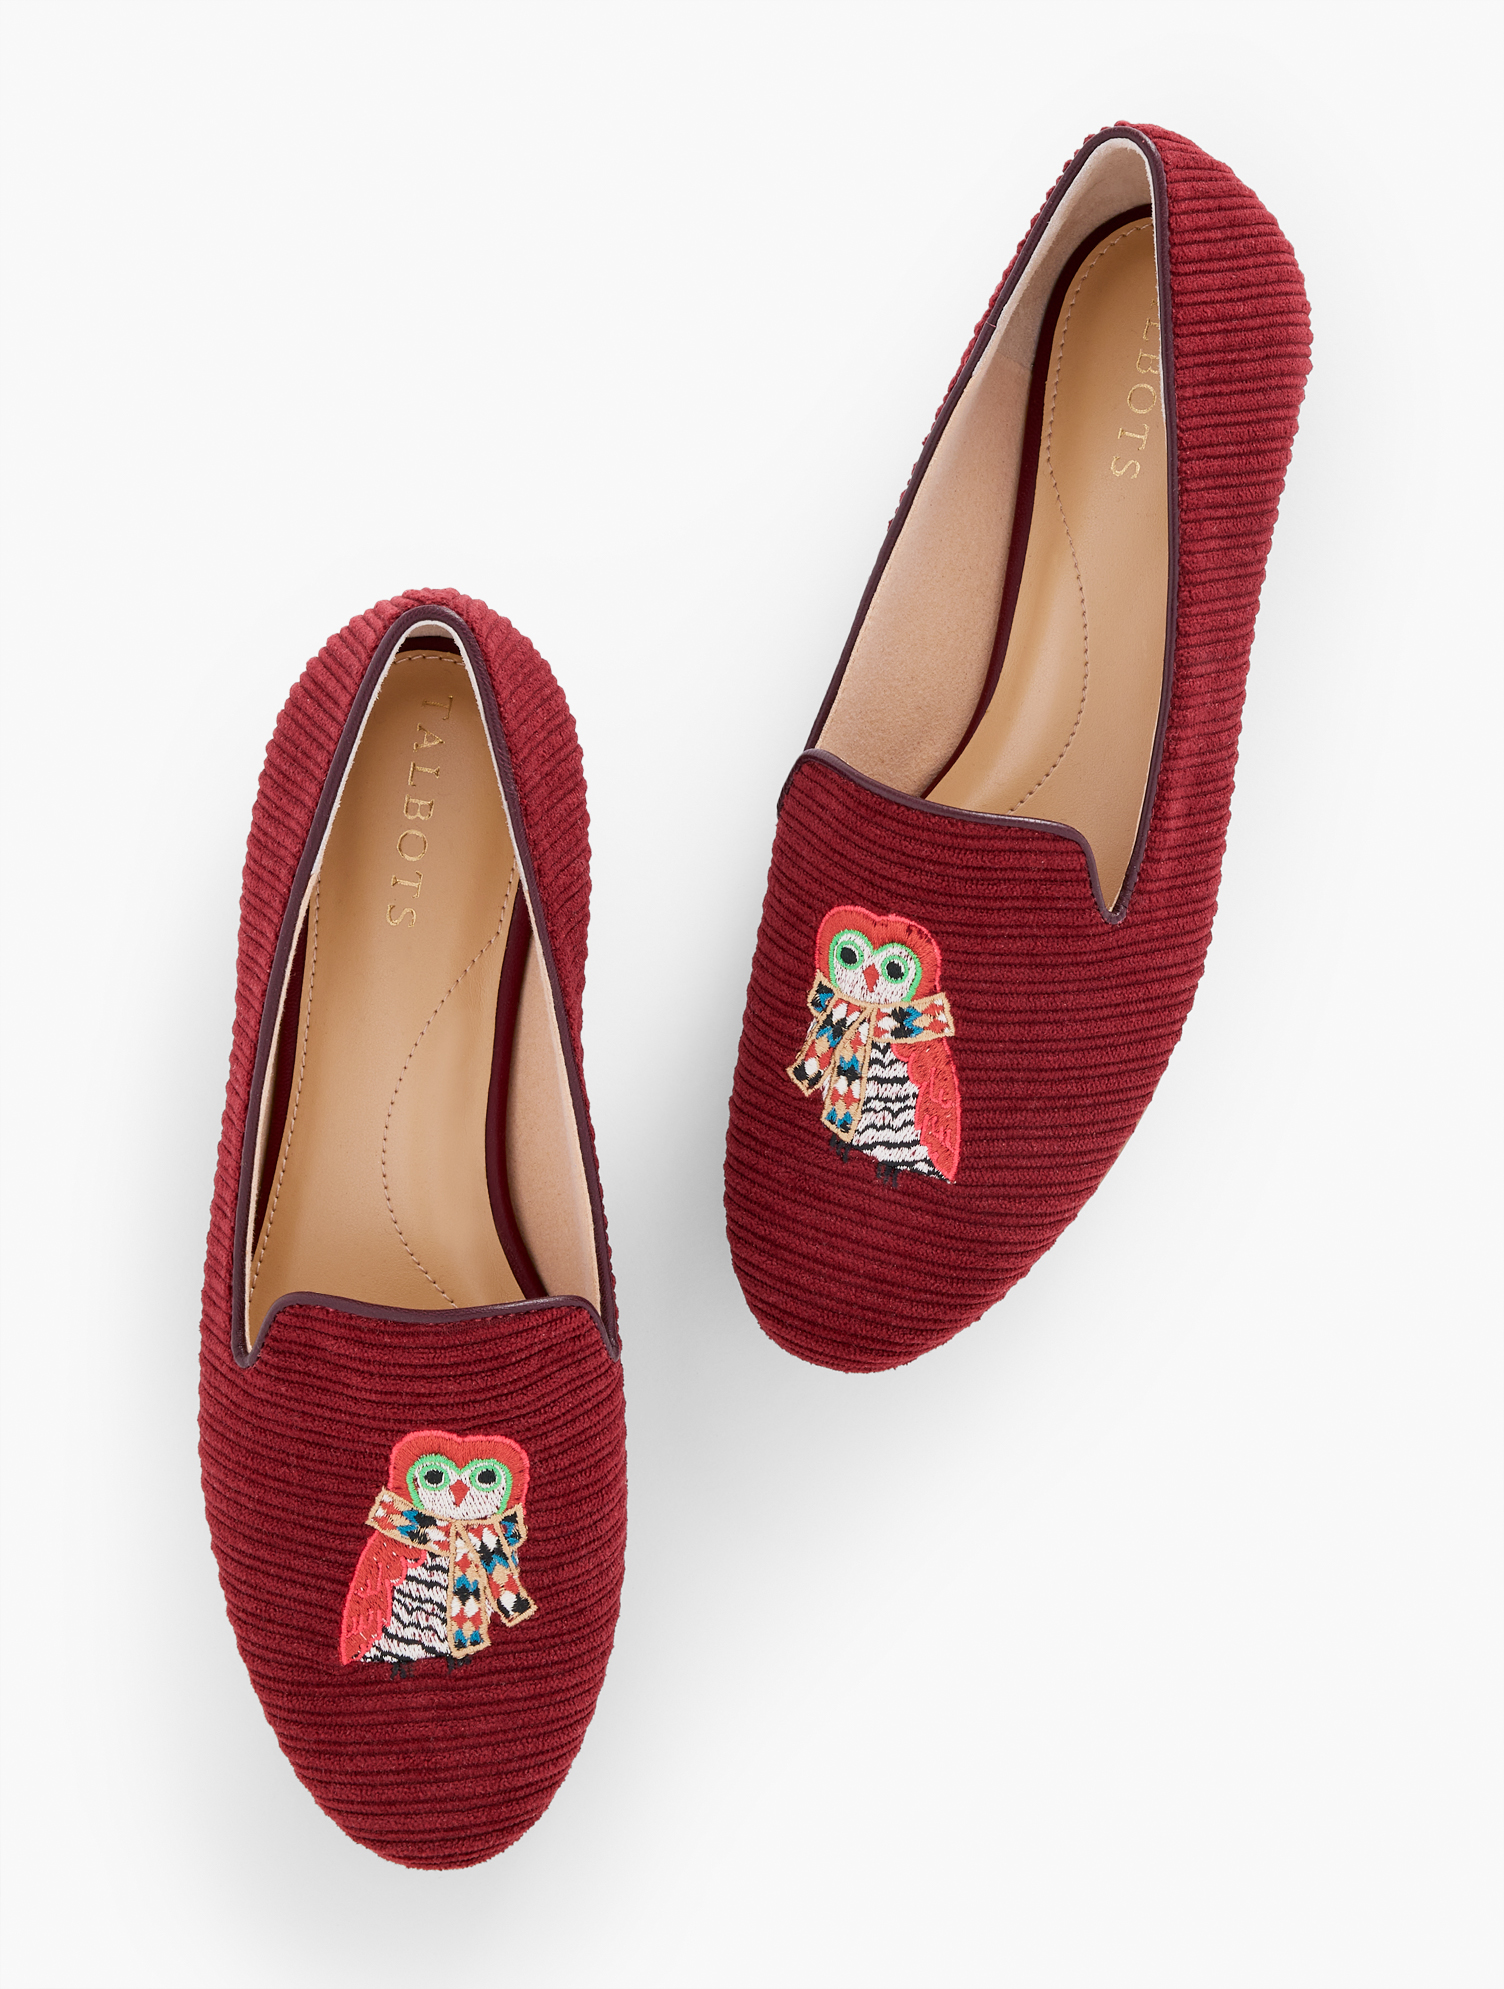 Talbots Ryan Corduroy Loafers - Embroidered Owl - Rich Burgundy - 11m